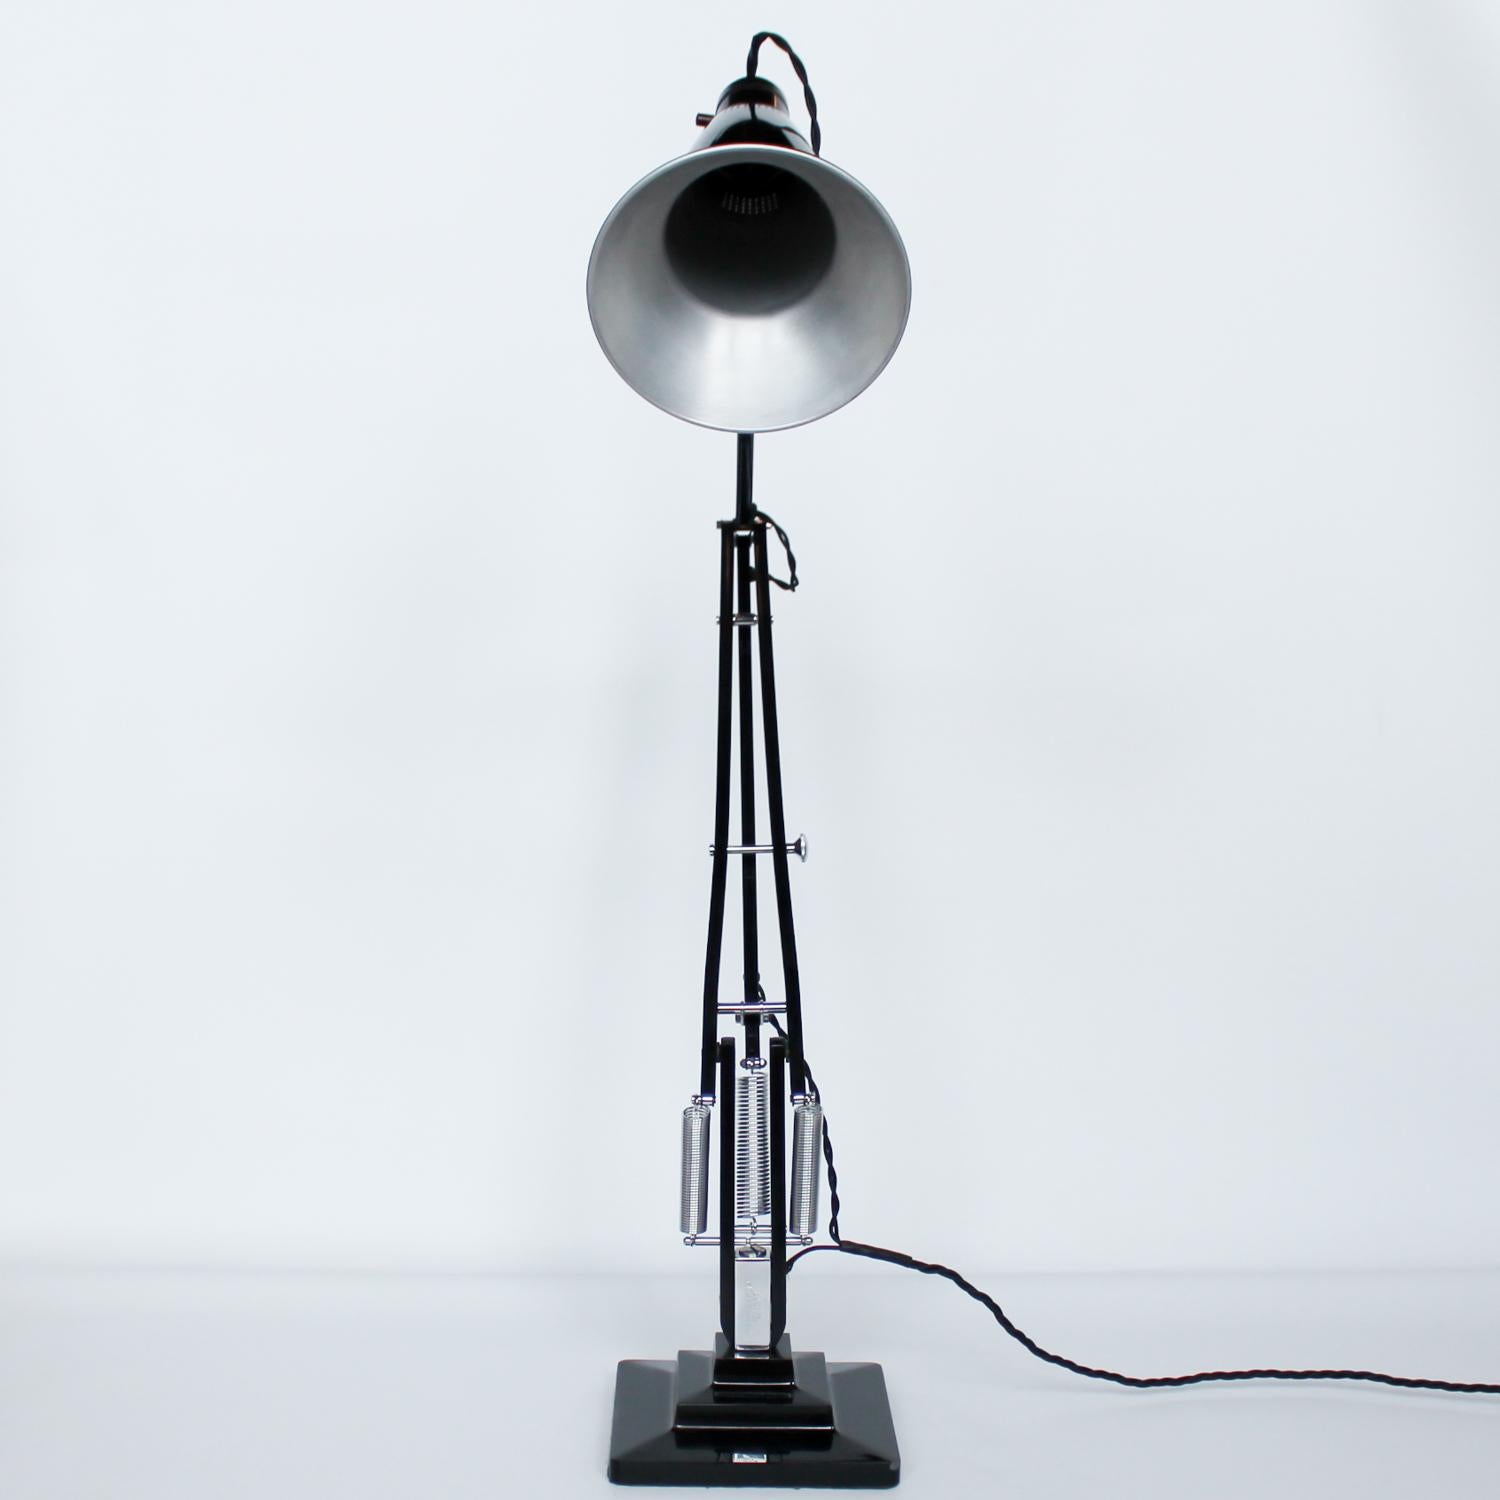 Metal Anglepoise Desk Lamp by Herbert Terry & Sons Designed by George Carwardine